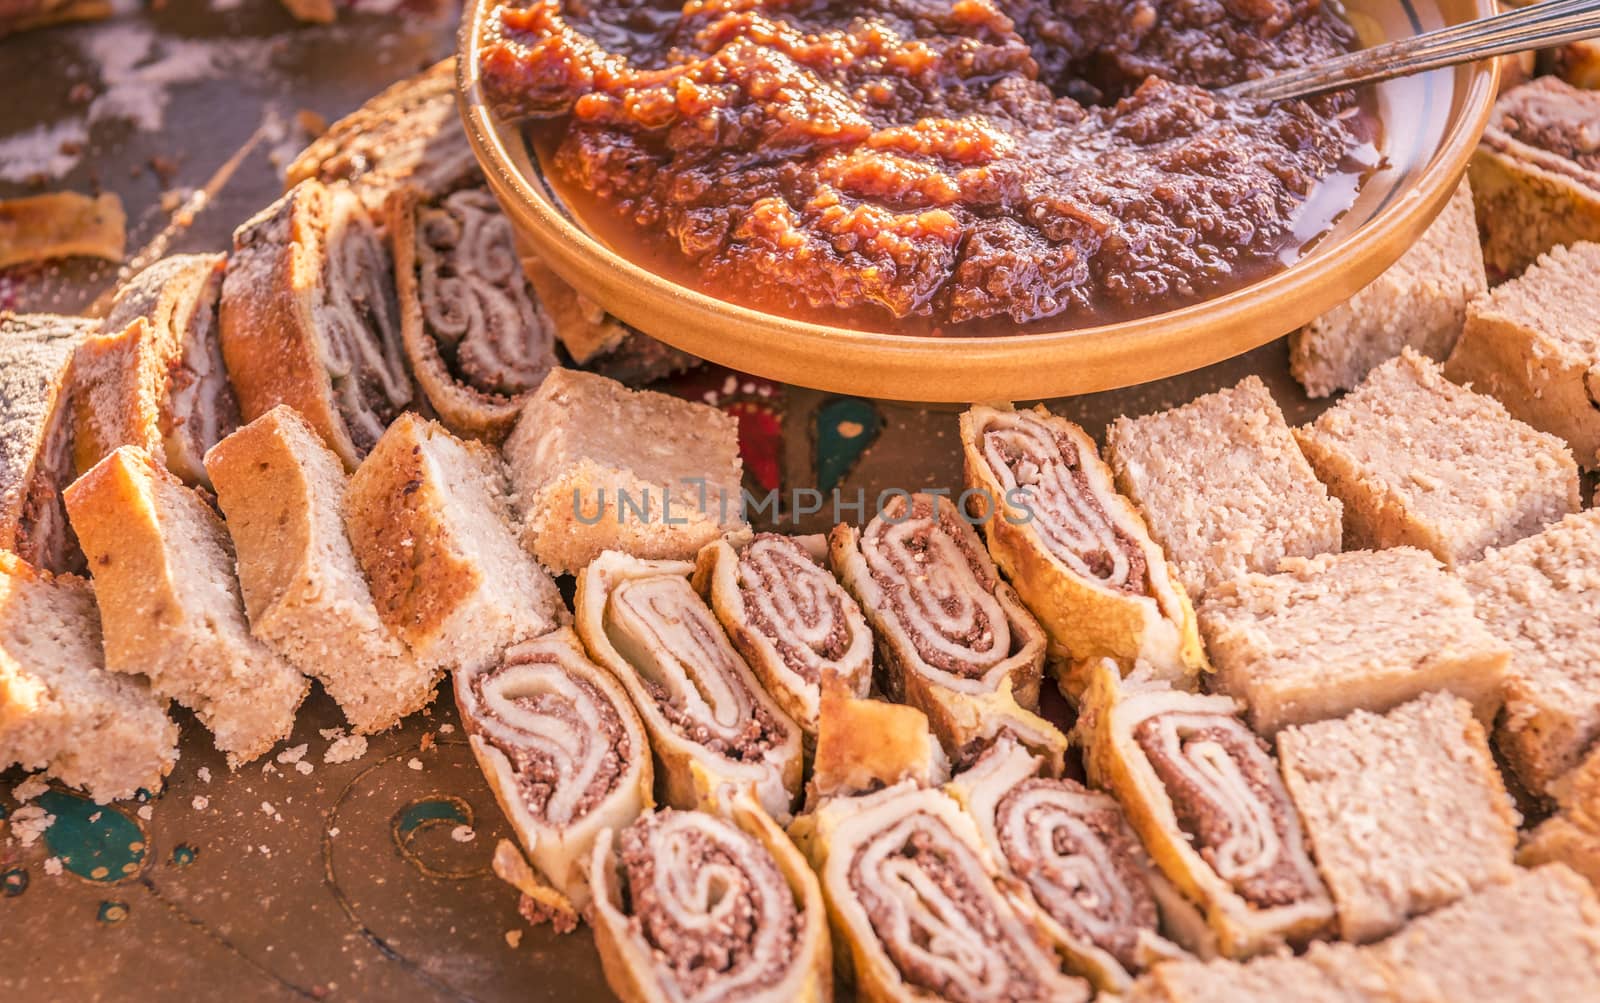 Sweet rolls and tasty cakes based on dried pears, served with a delicious pear jam, specific to the Zasip town, Slovenia.